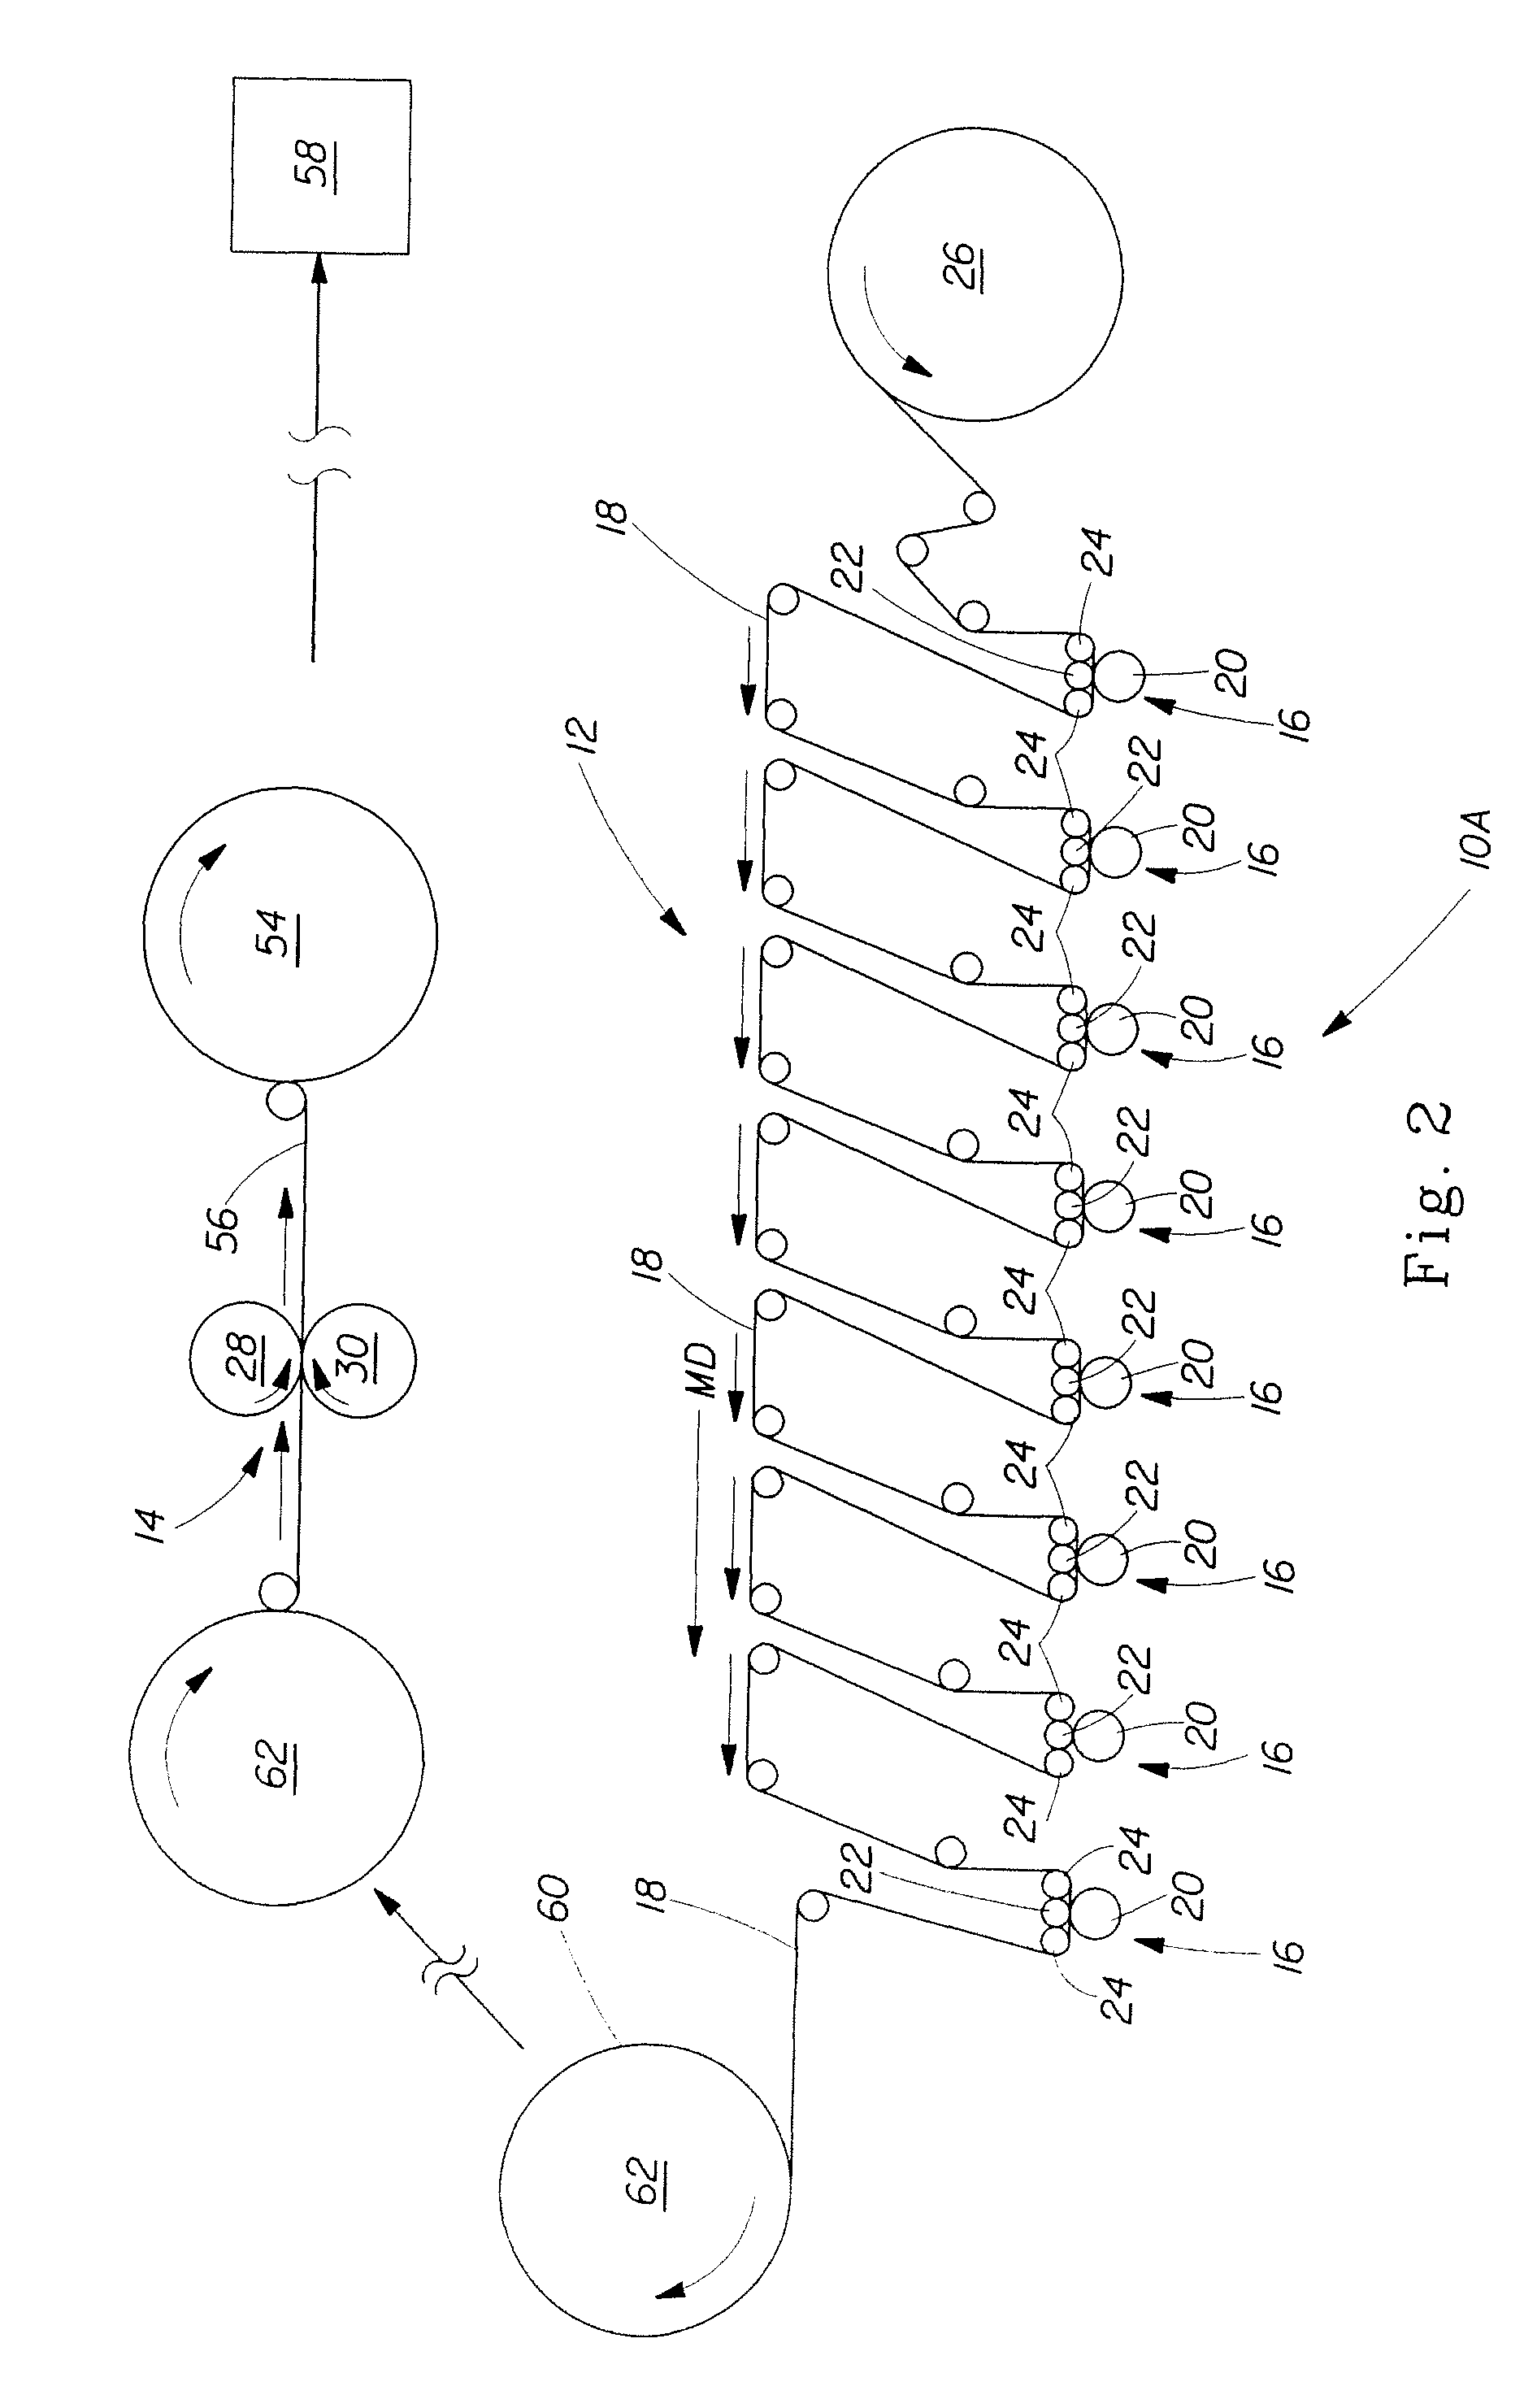 Apparatus for producing a web substrate having indicia disposed thereon and elastic-like behavior imparted thereto